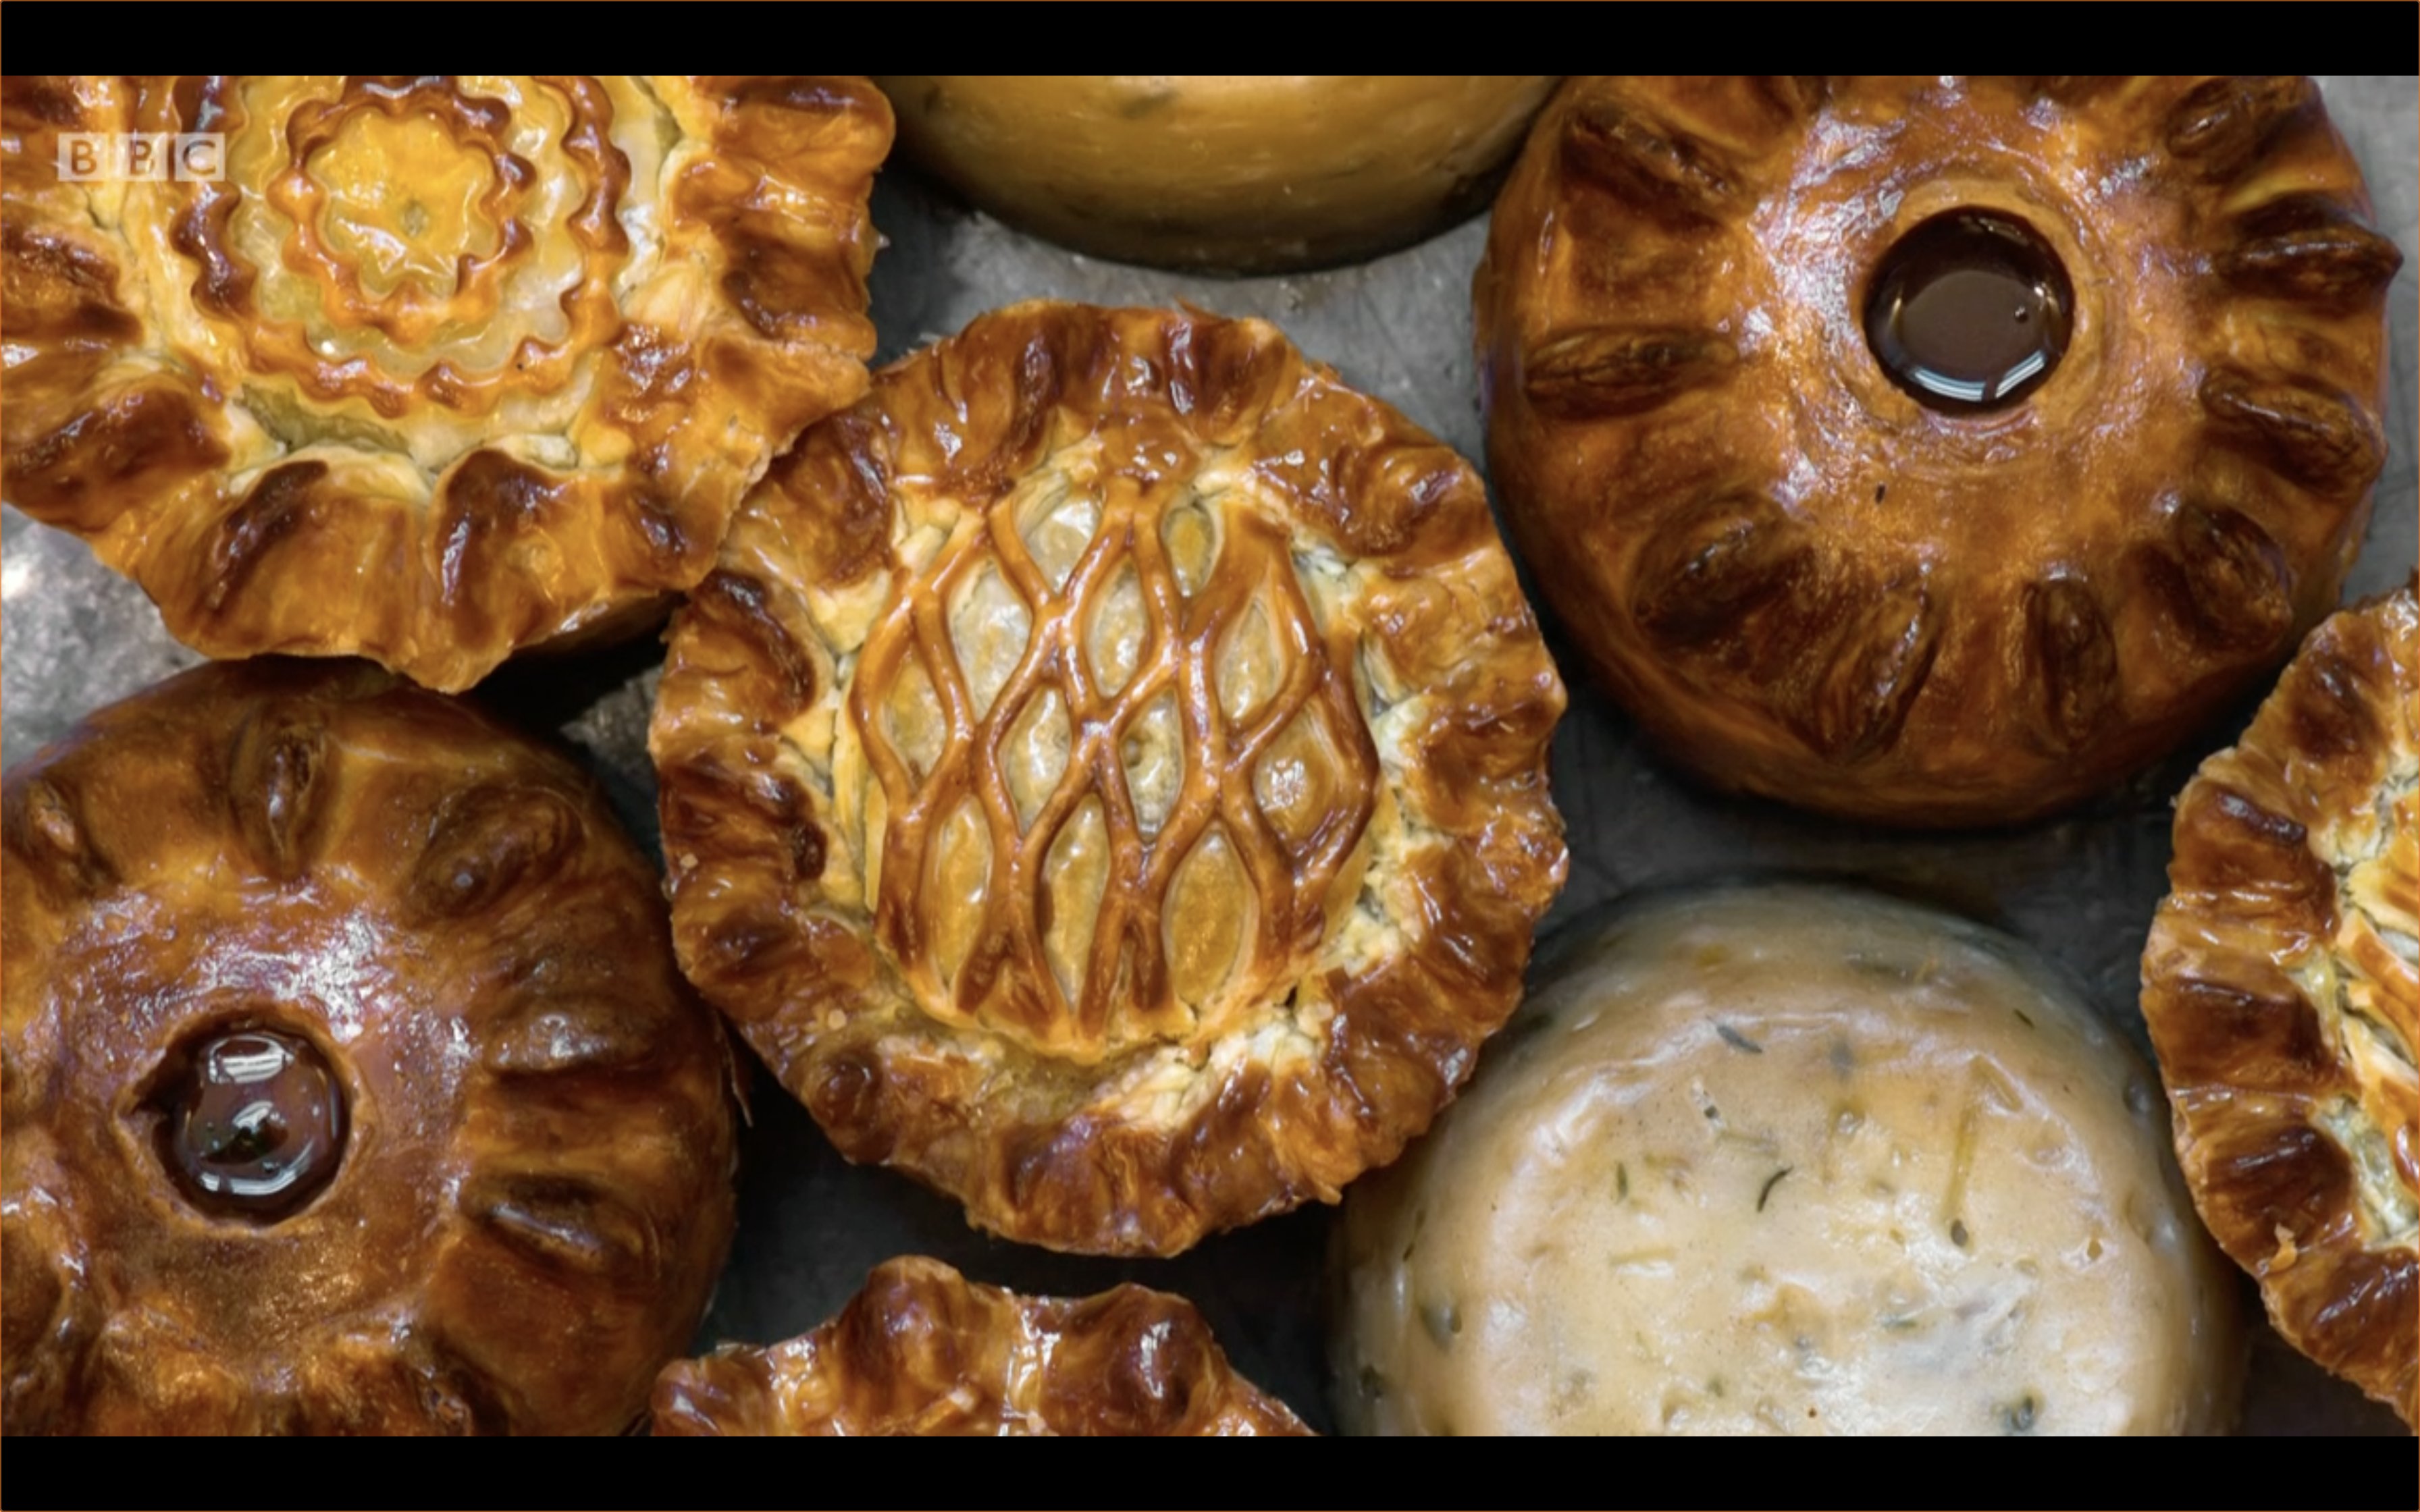 A range of intricately decorated pies from Calum Franklin’s Pie Room at Holborn Dining Room